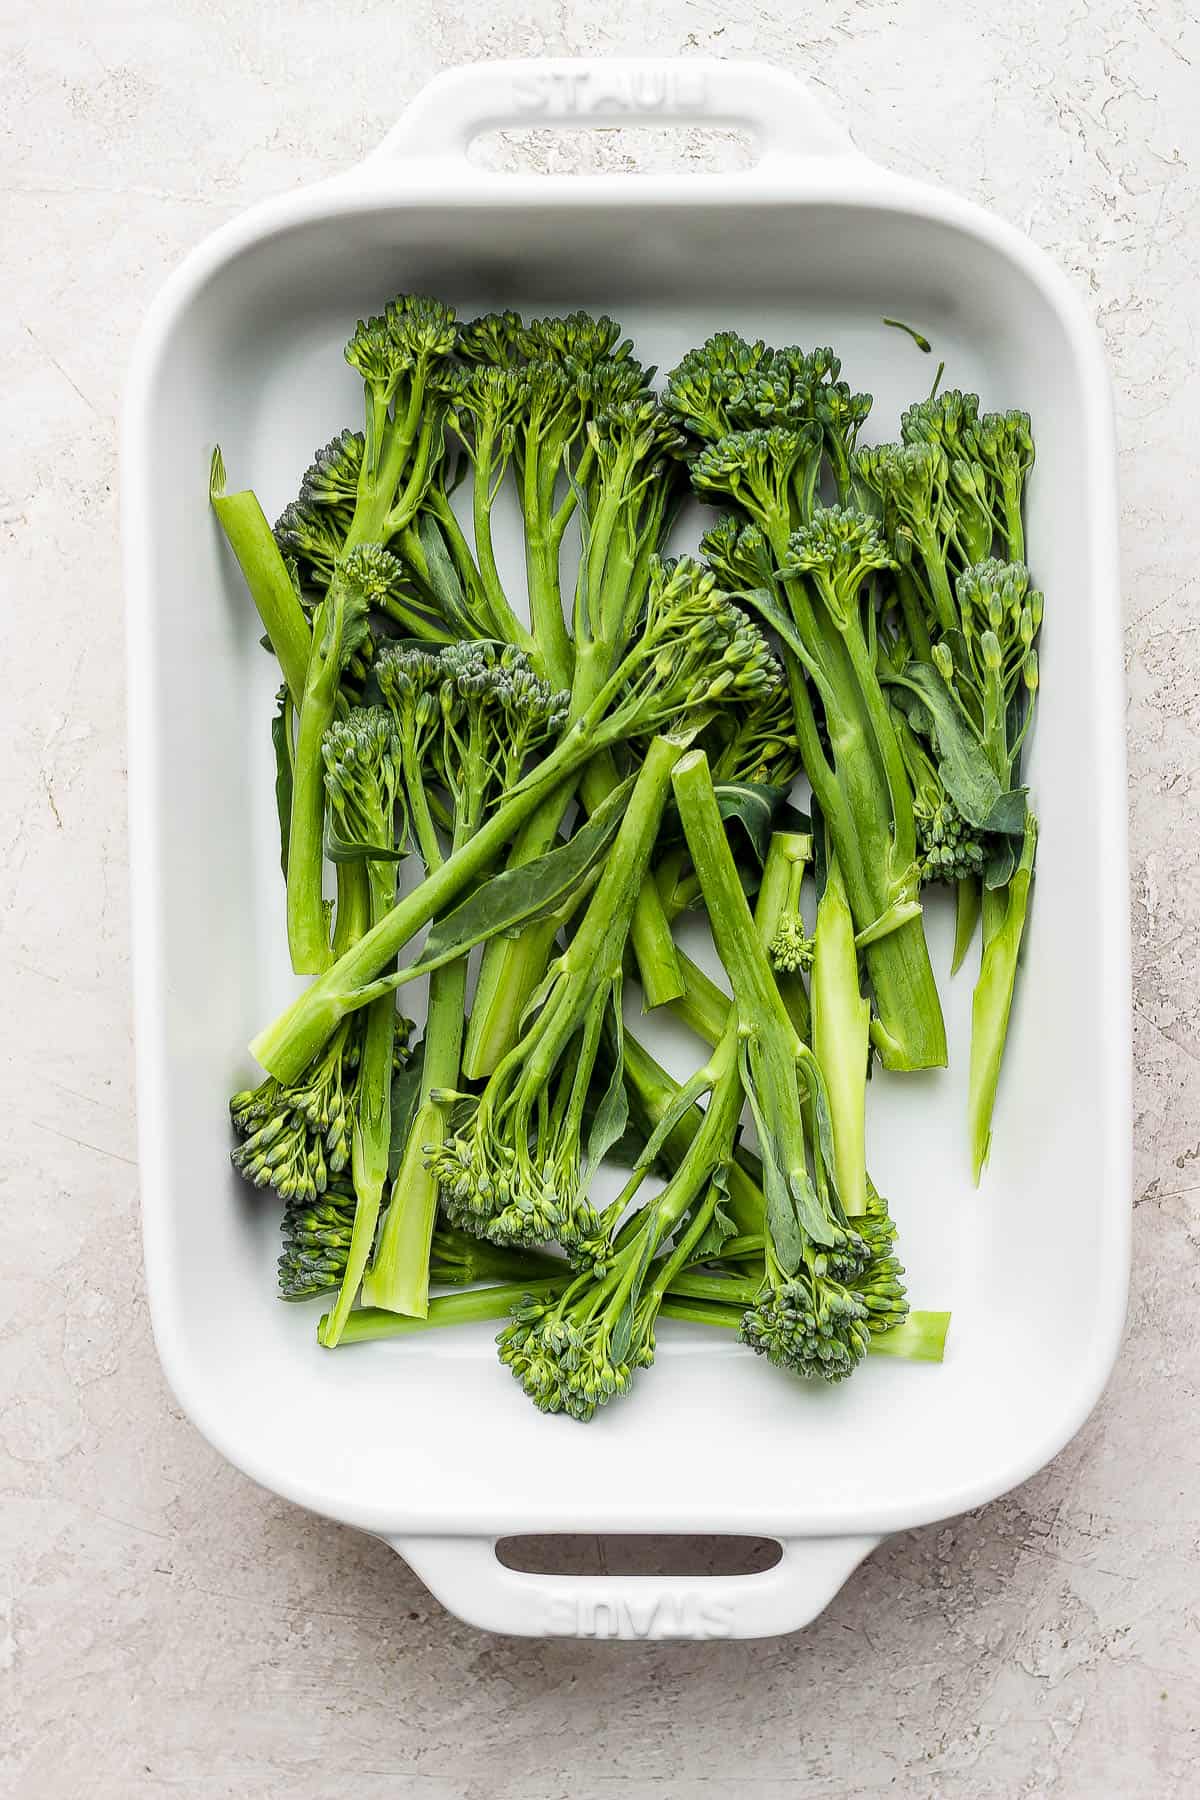 Fresh broccolini with trimmed stems in a shallow baking dish.